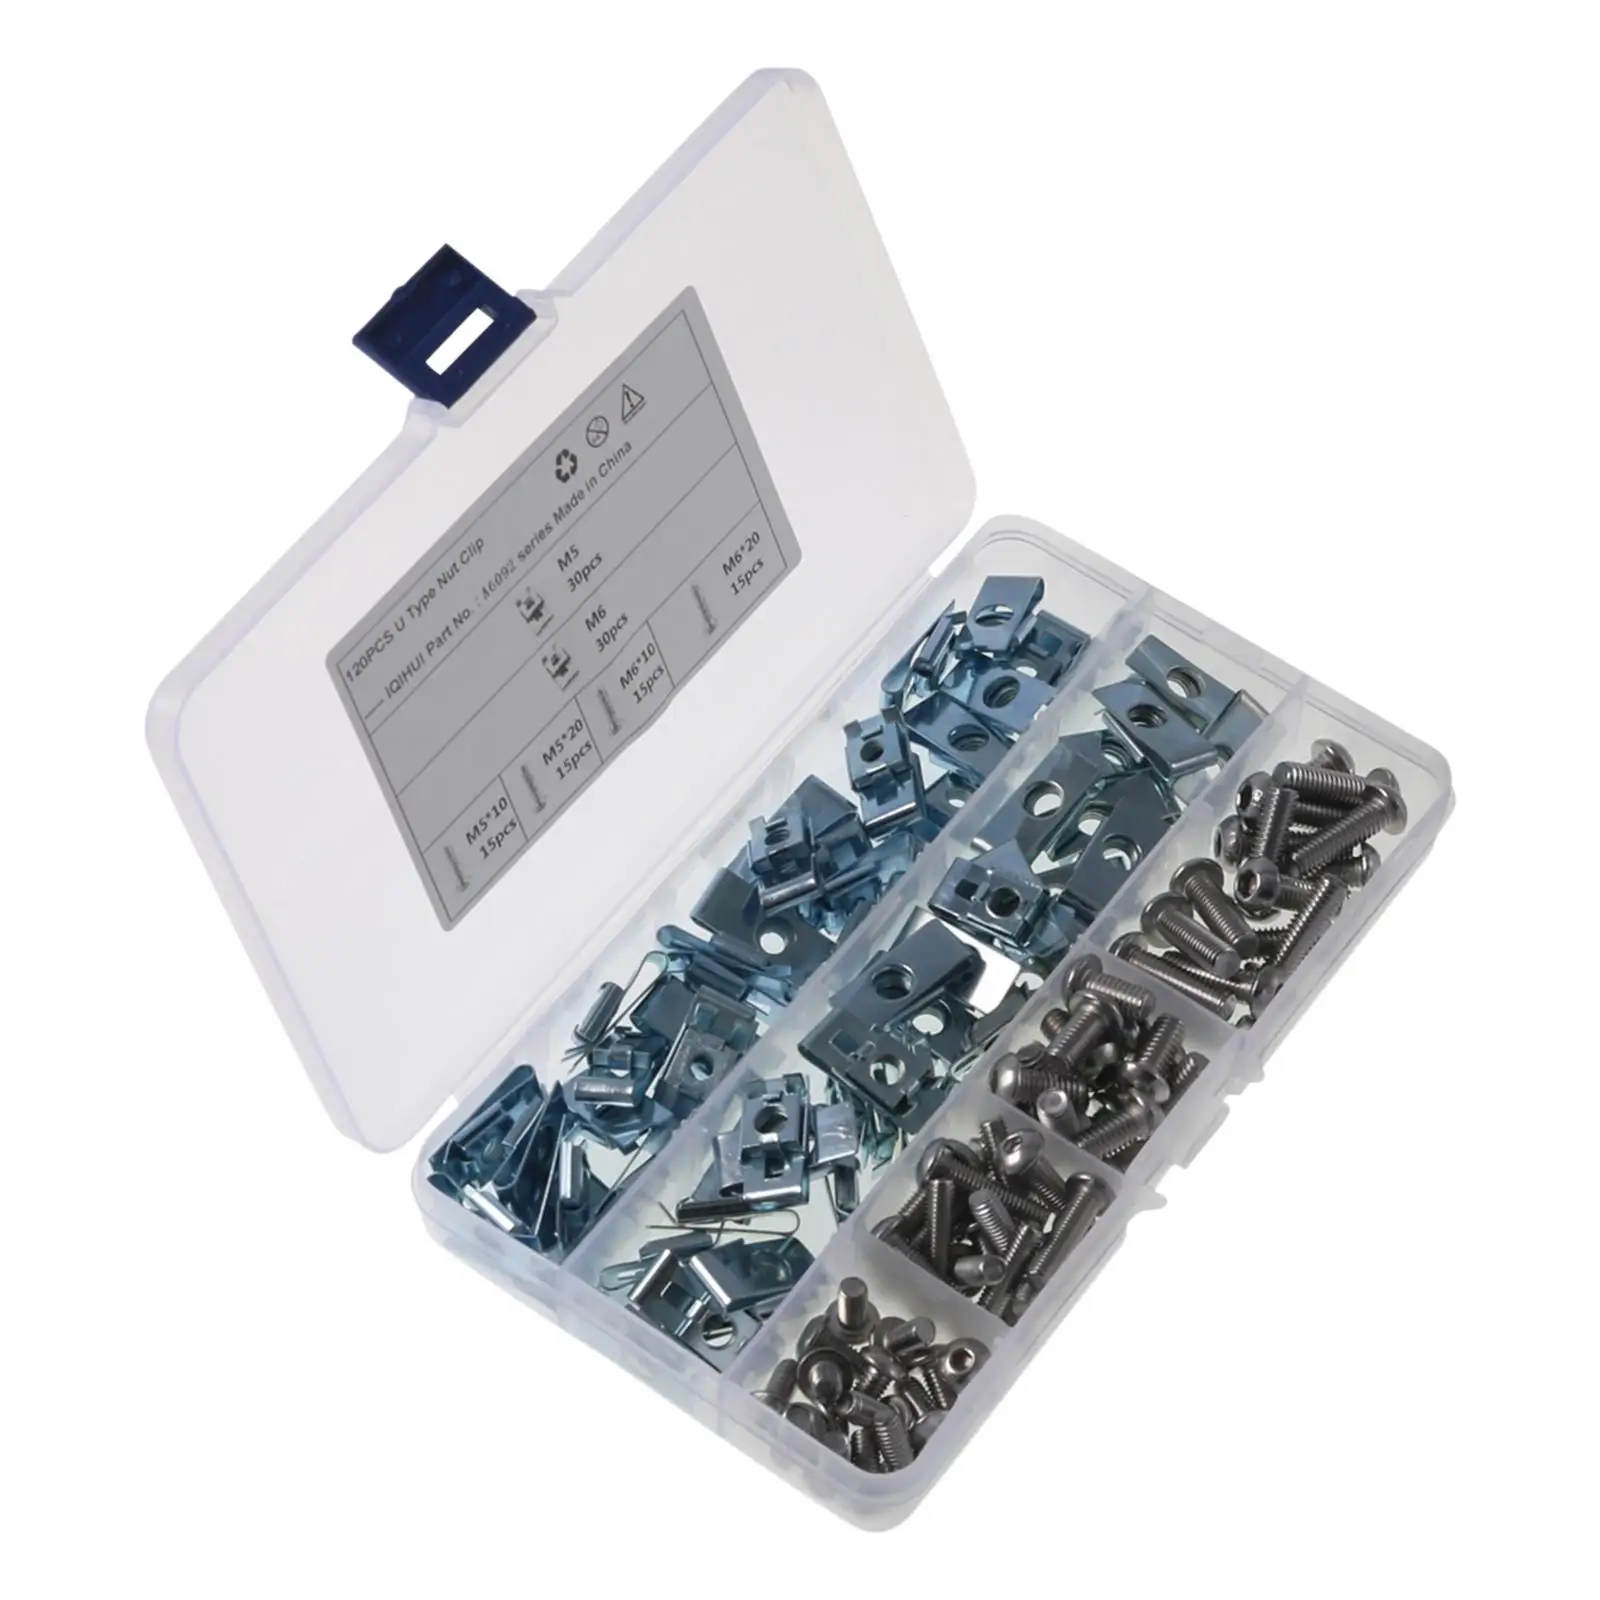 120x Screw Nut Clip Set Replaces Fastener for Car Tractor Motorcycle